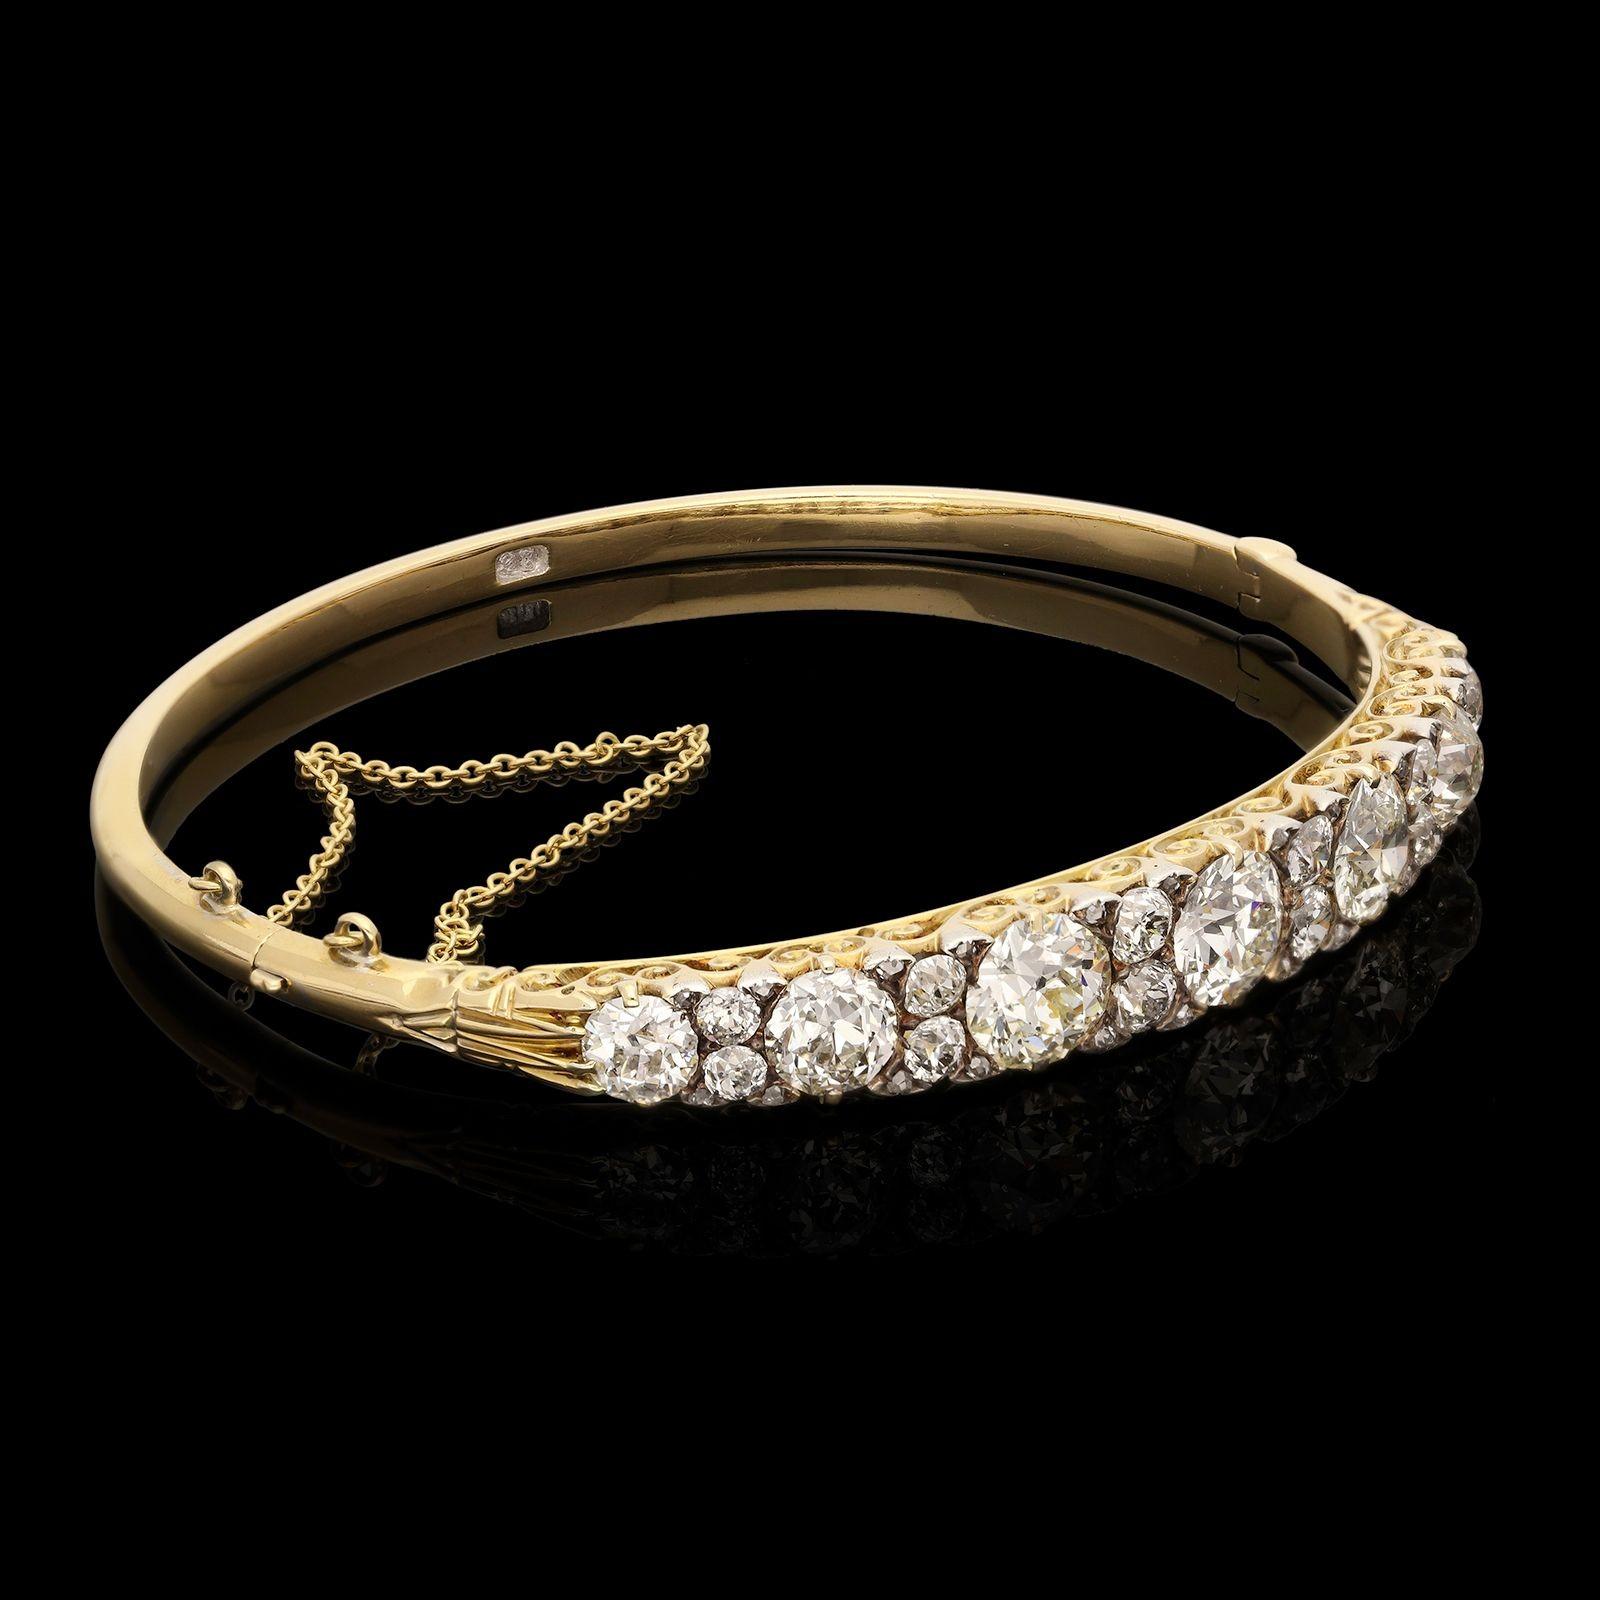 A beautiful Victorian gold and diamond hinged bangle c.1890s, the classic hoop style bangle formed of 18ct yellow gold and set to the front with seven graduated old European brilliant cut diamonds interspersed with pairs of smaller old European